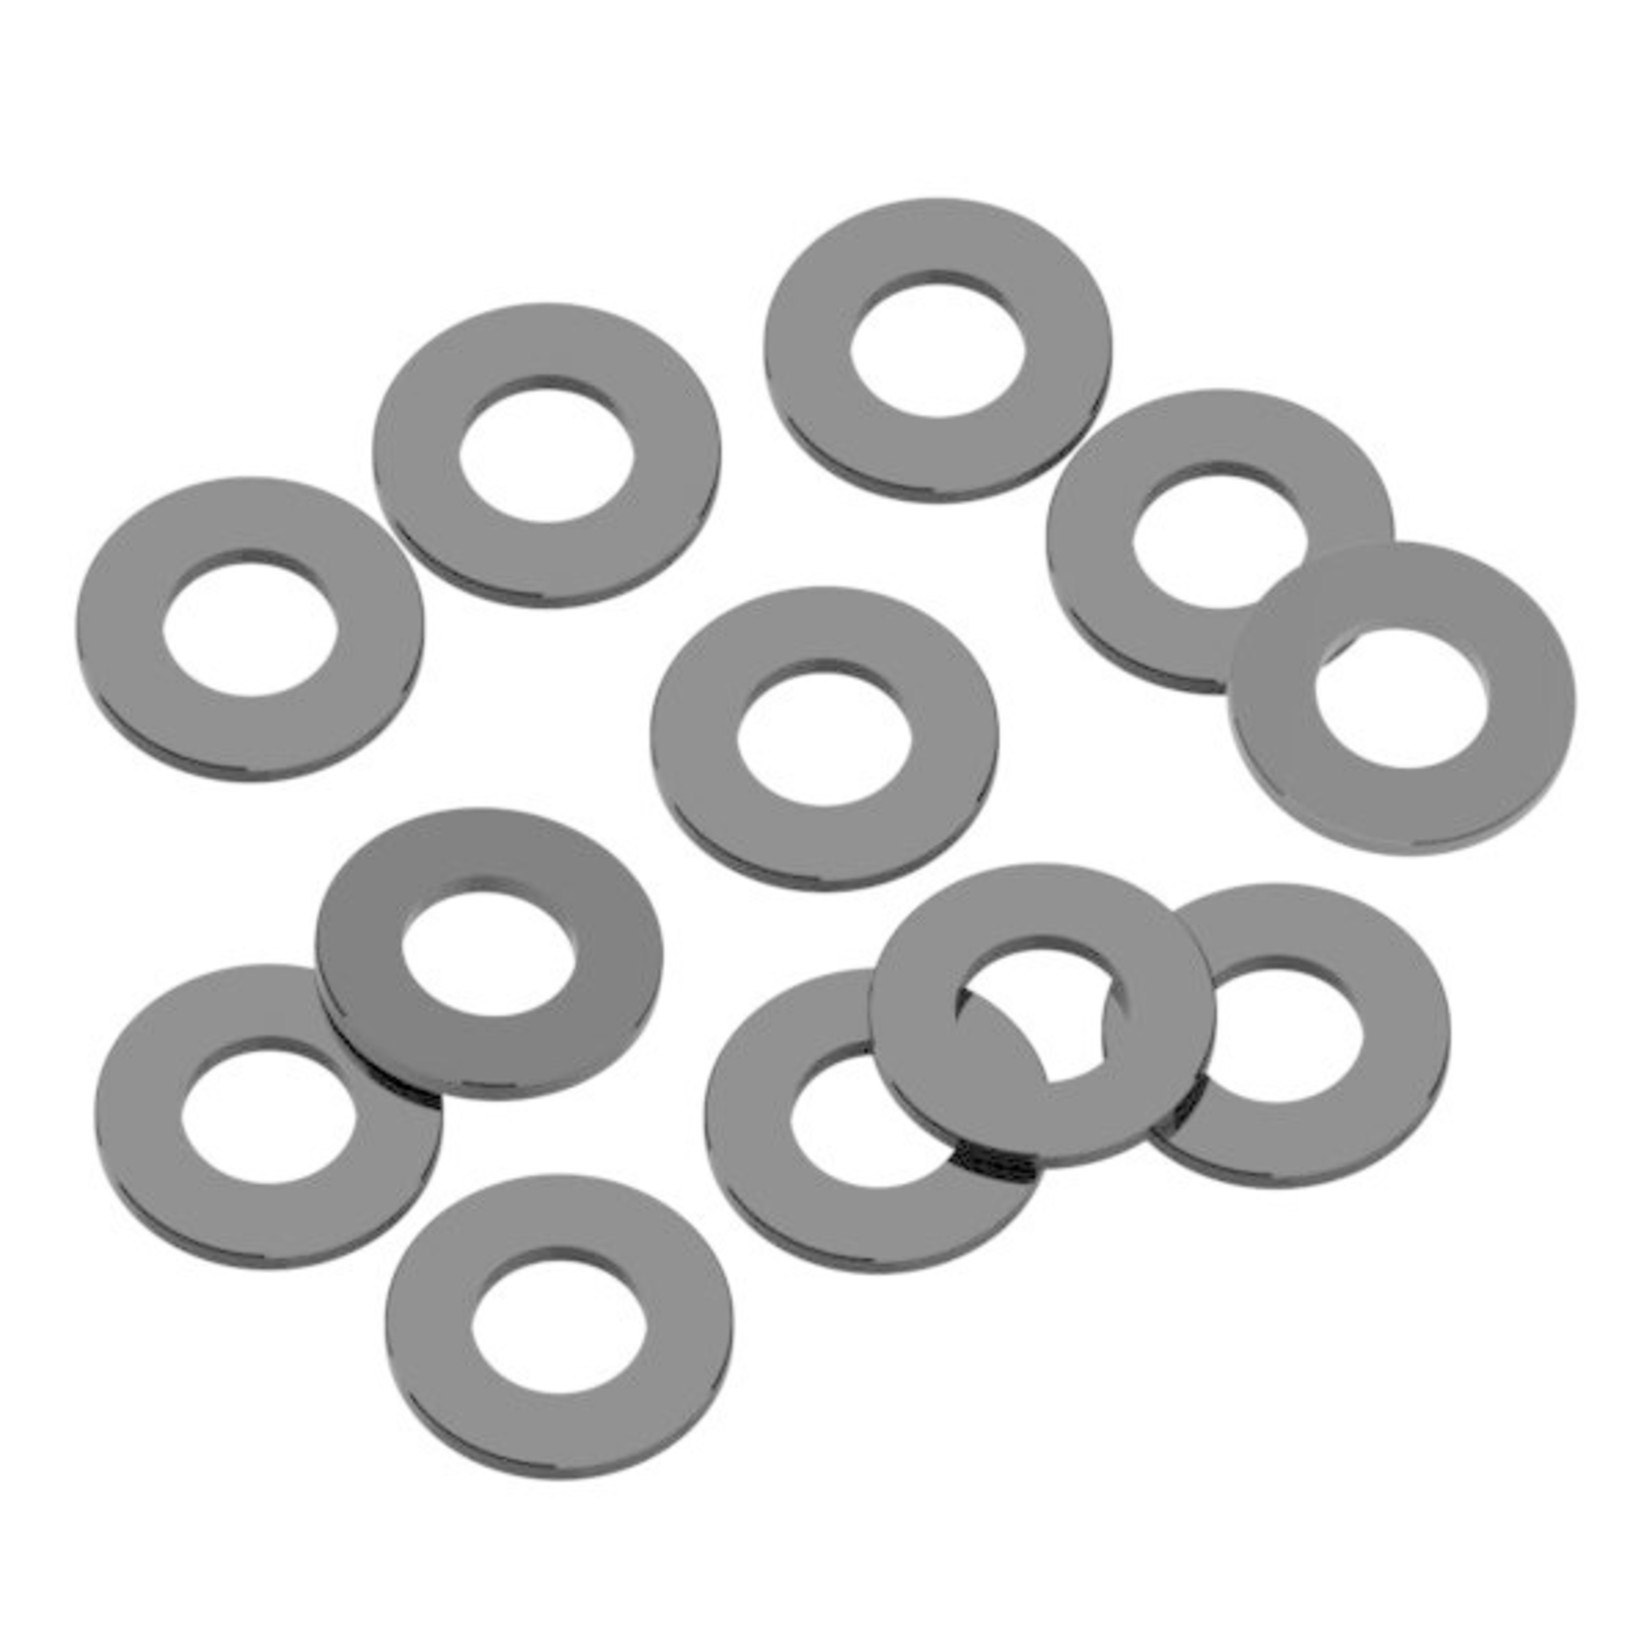 1UP Aluminum Shims 3x6x0.5mm Thick